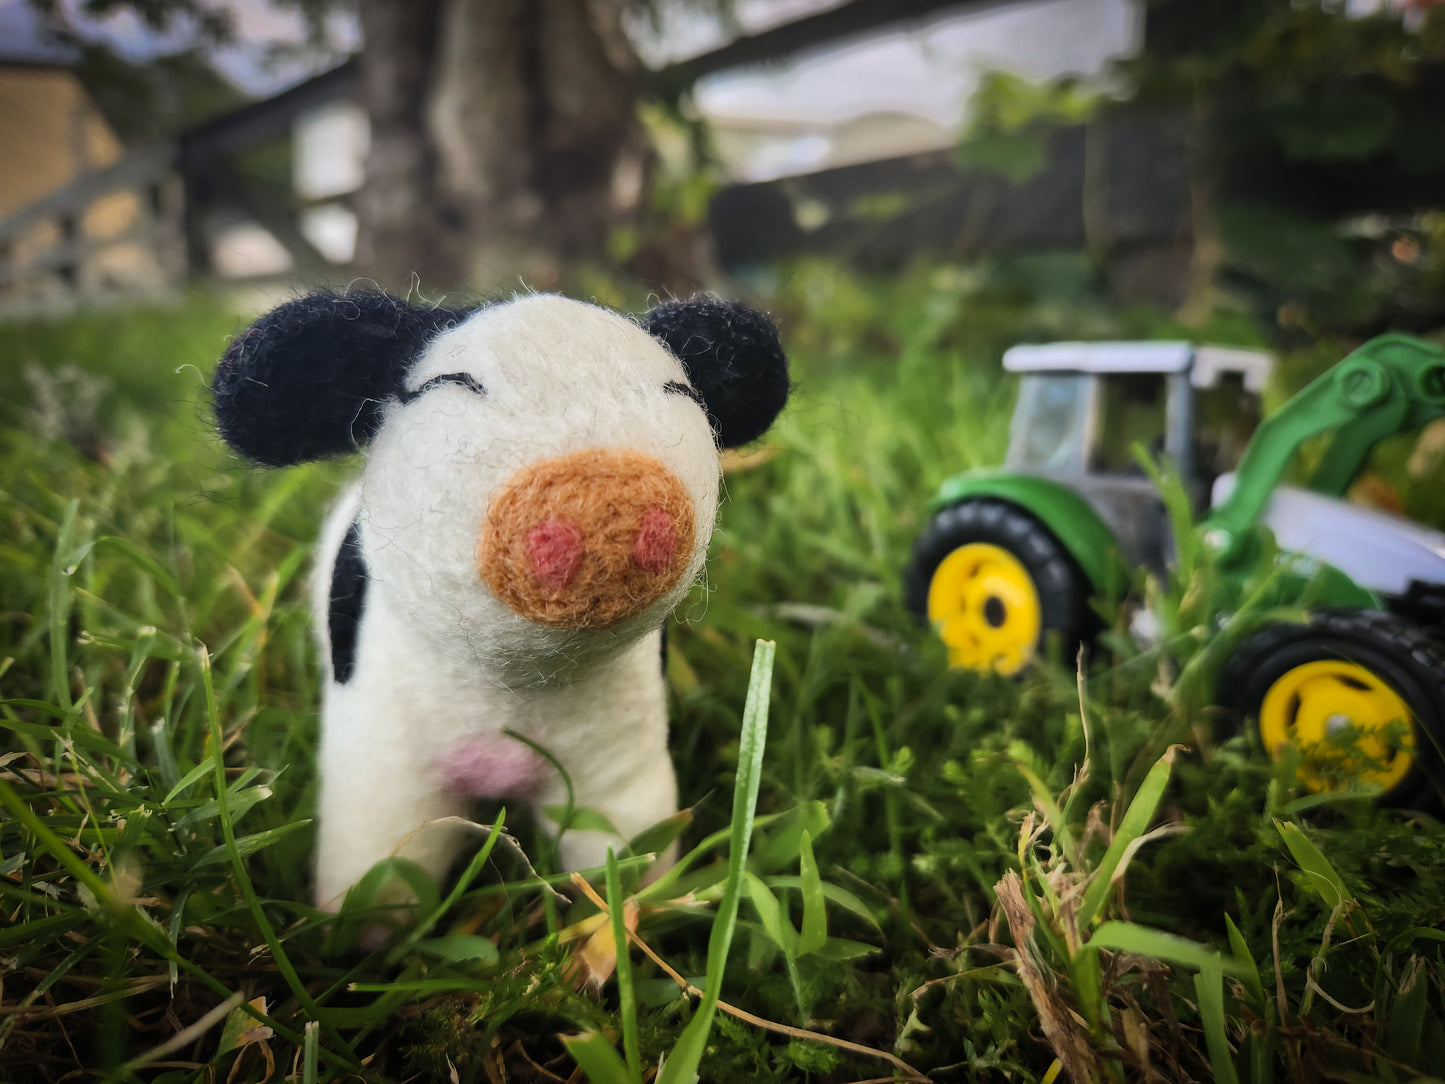 Candice the Calf - Felted Cow Toy in grass paddock with toy tractor